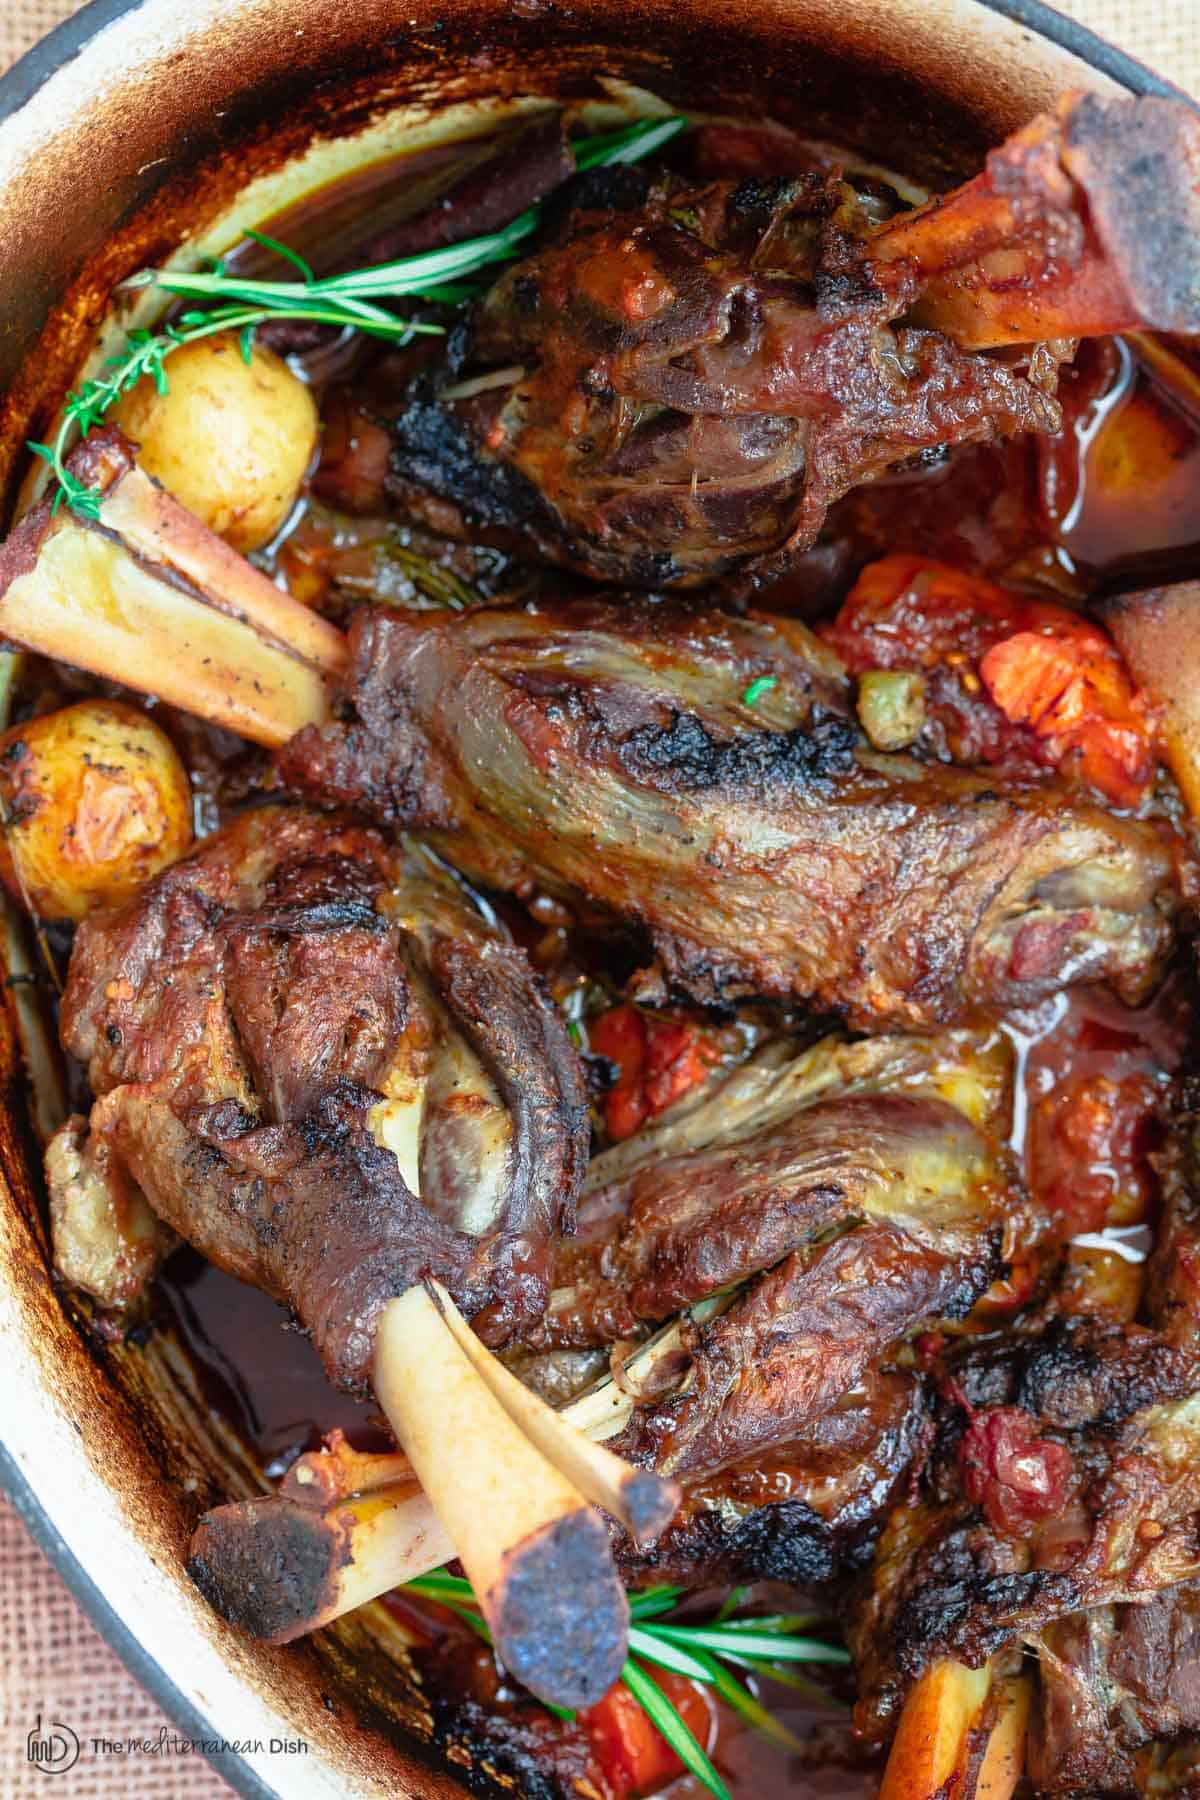 Braised lamb shanks with potatoes, carrots and rosemary in Dutch oven